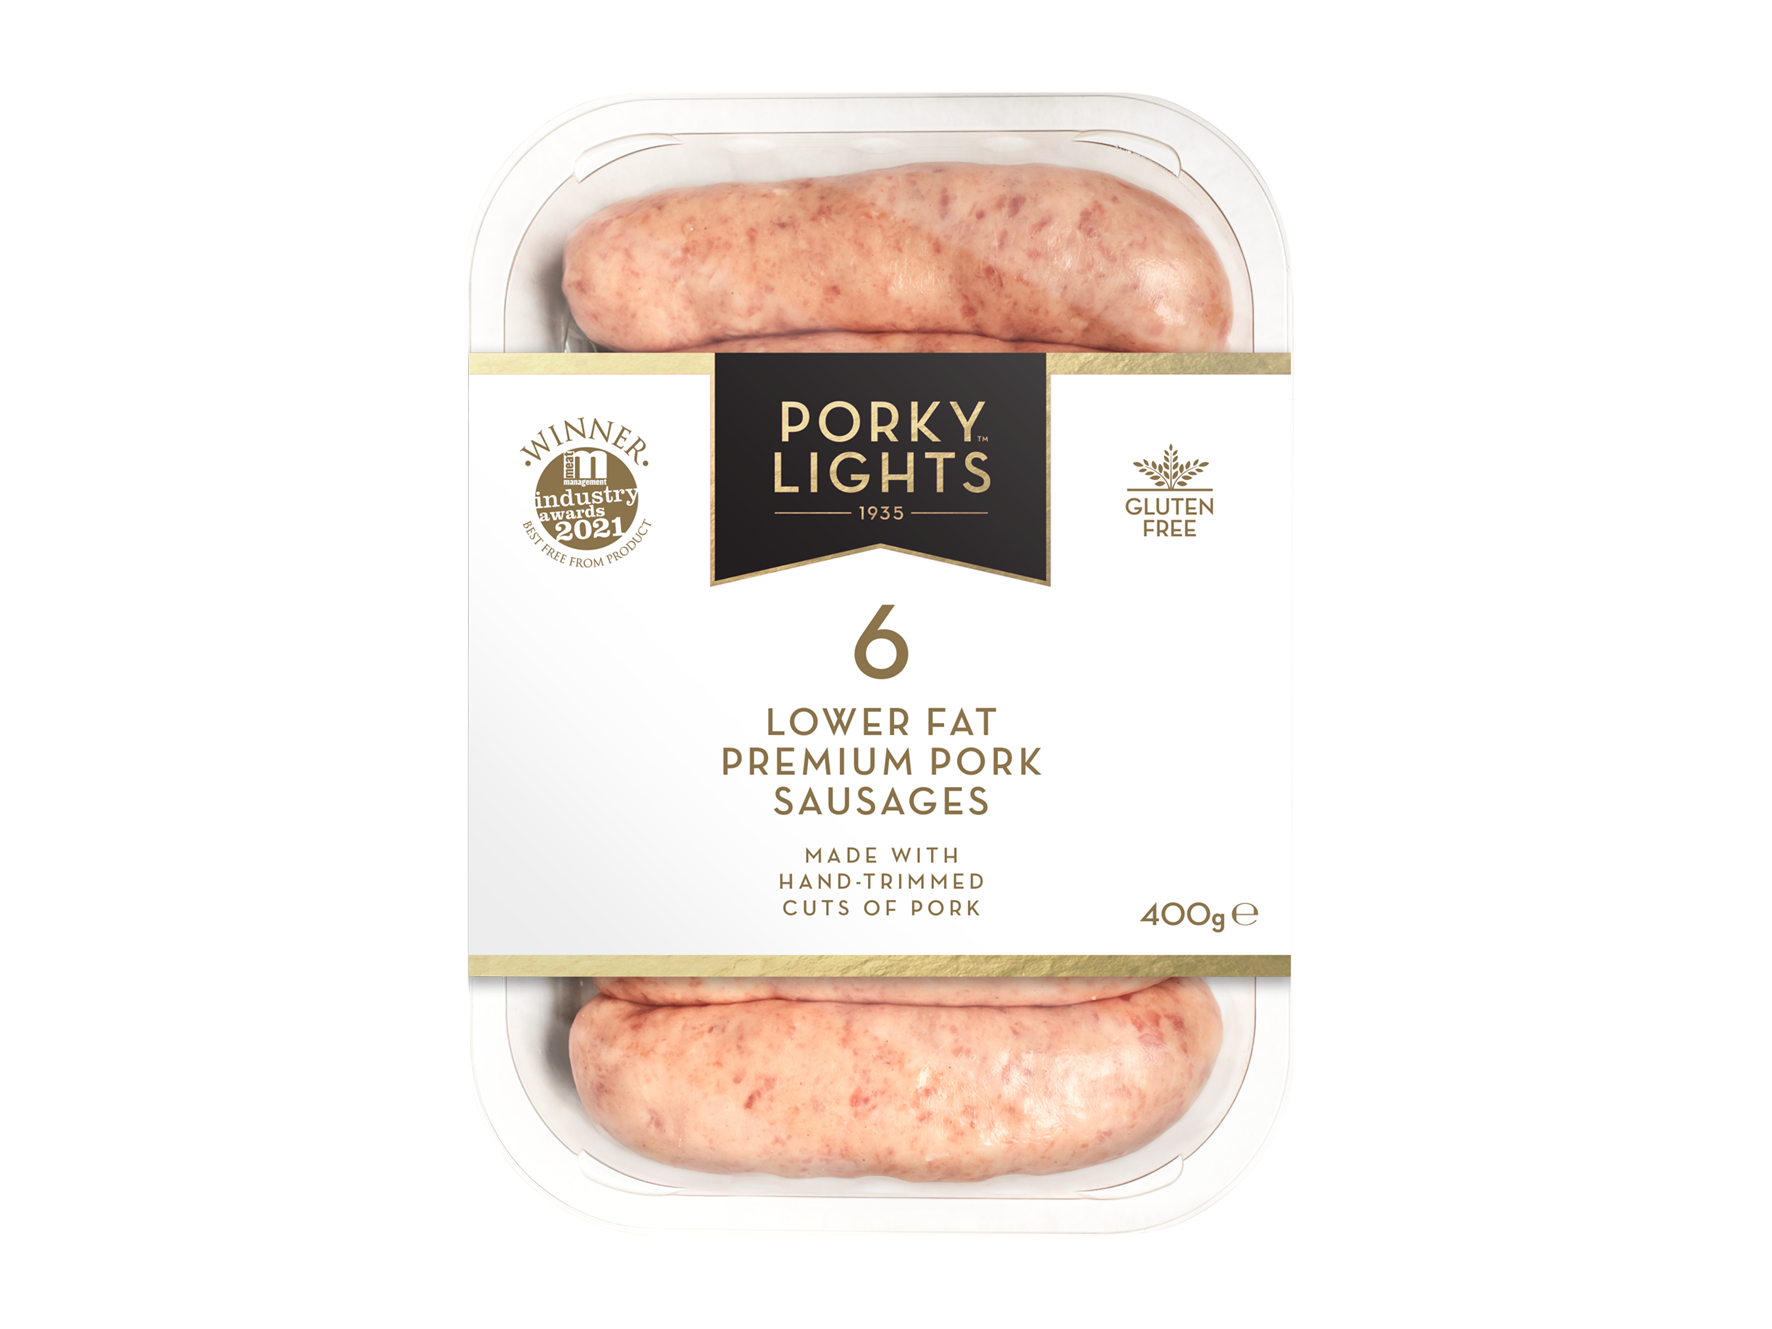 Porky Lights: free from gluten, bursting with success